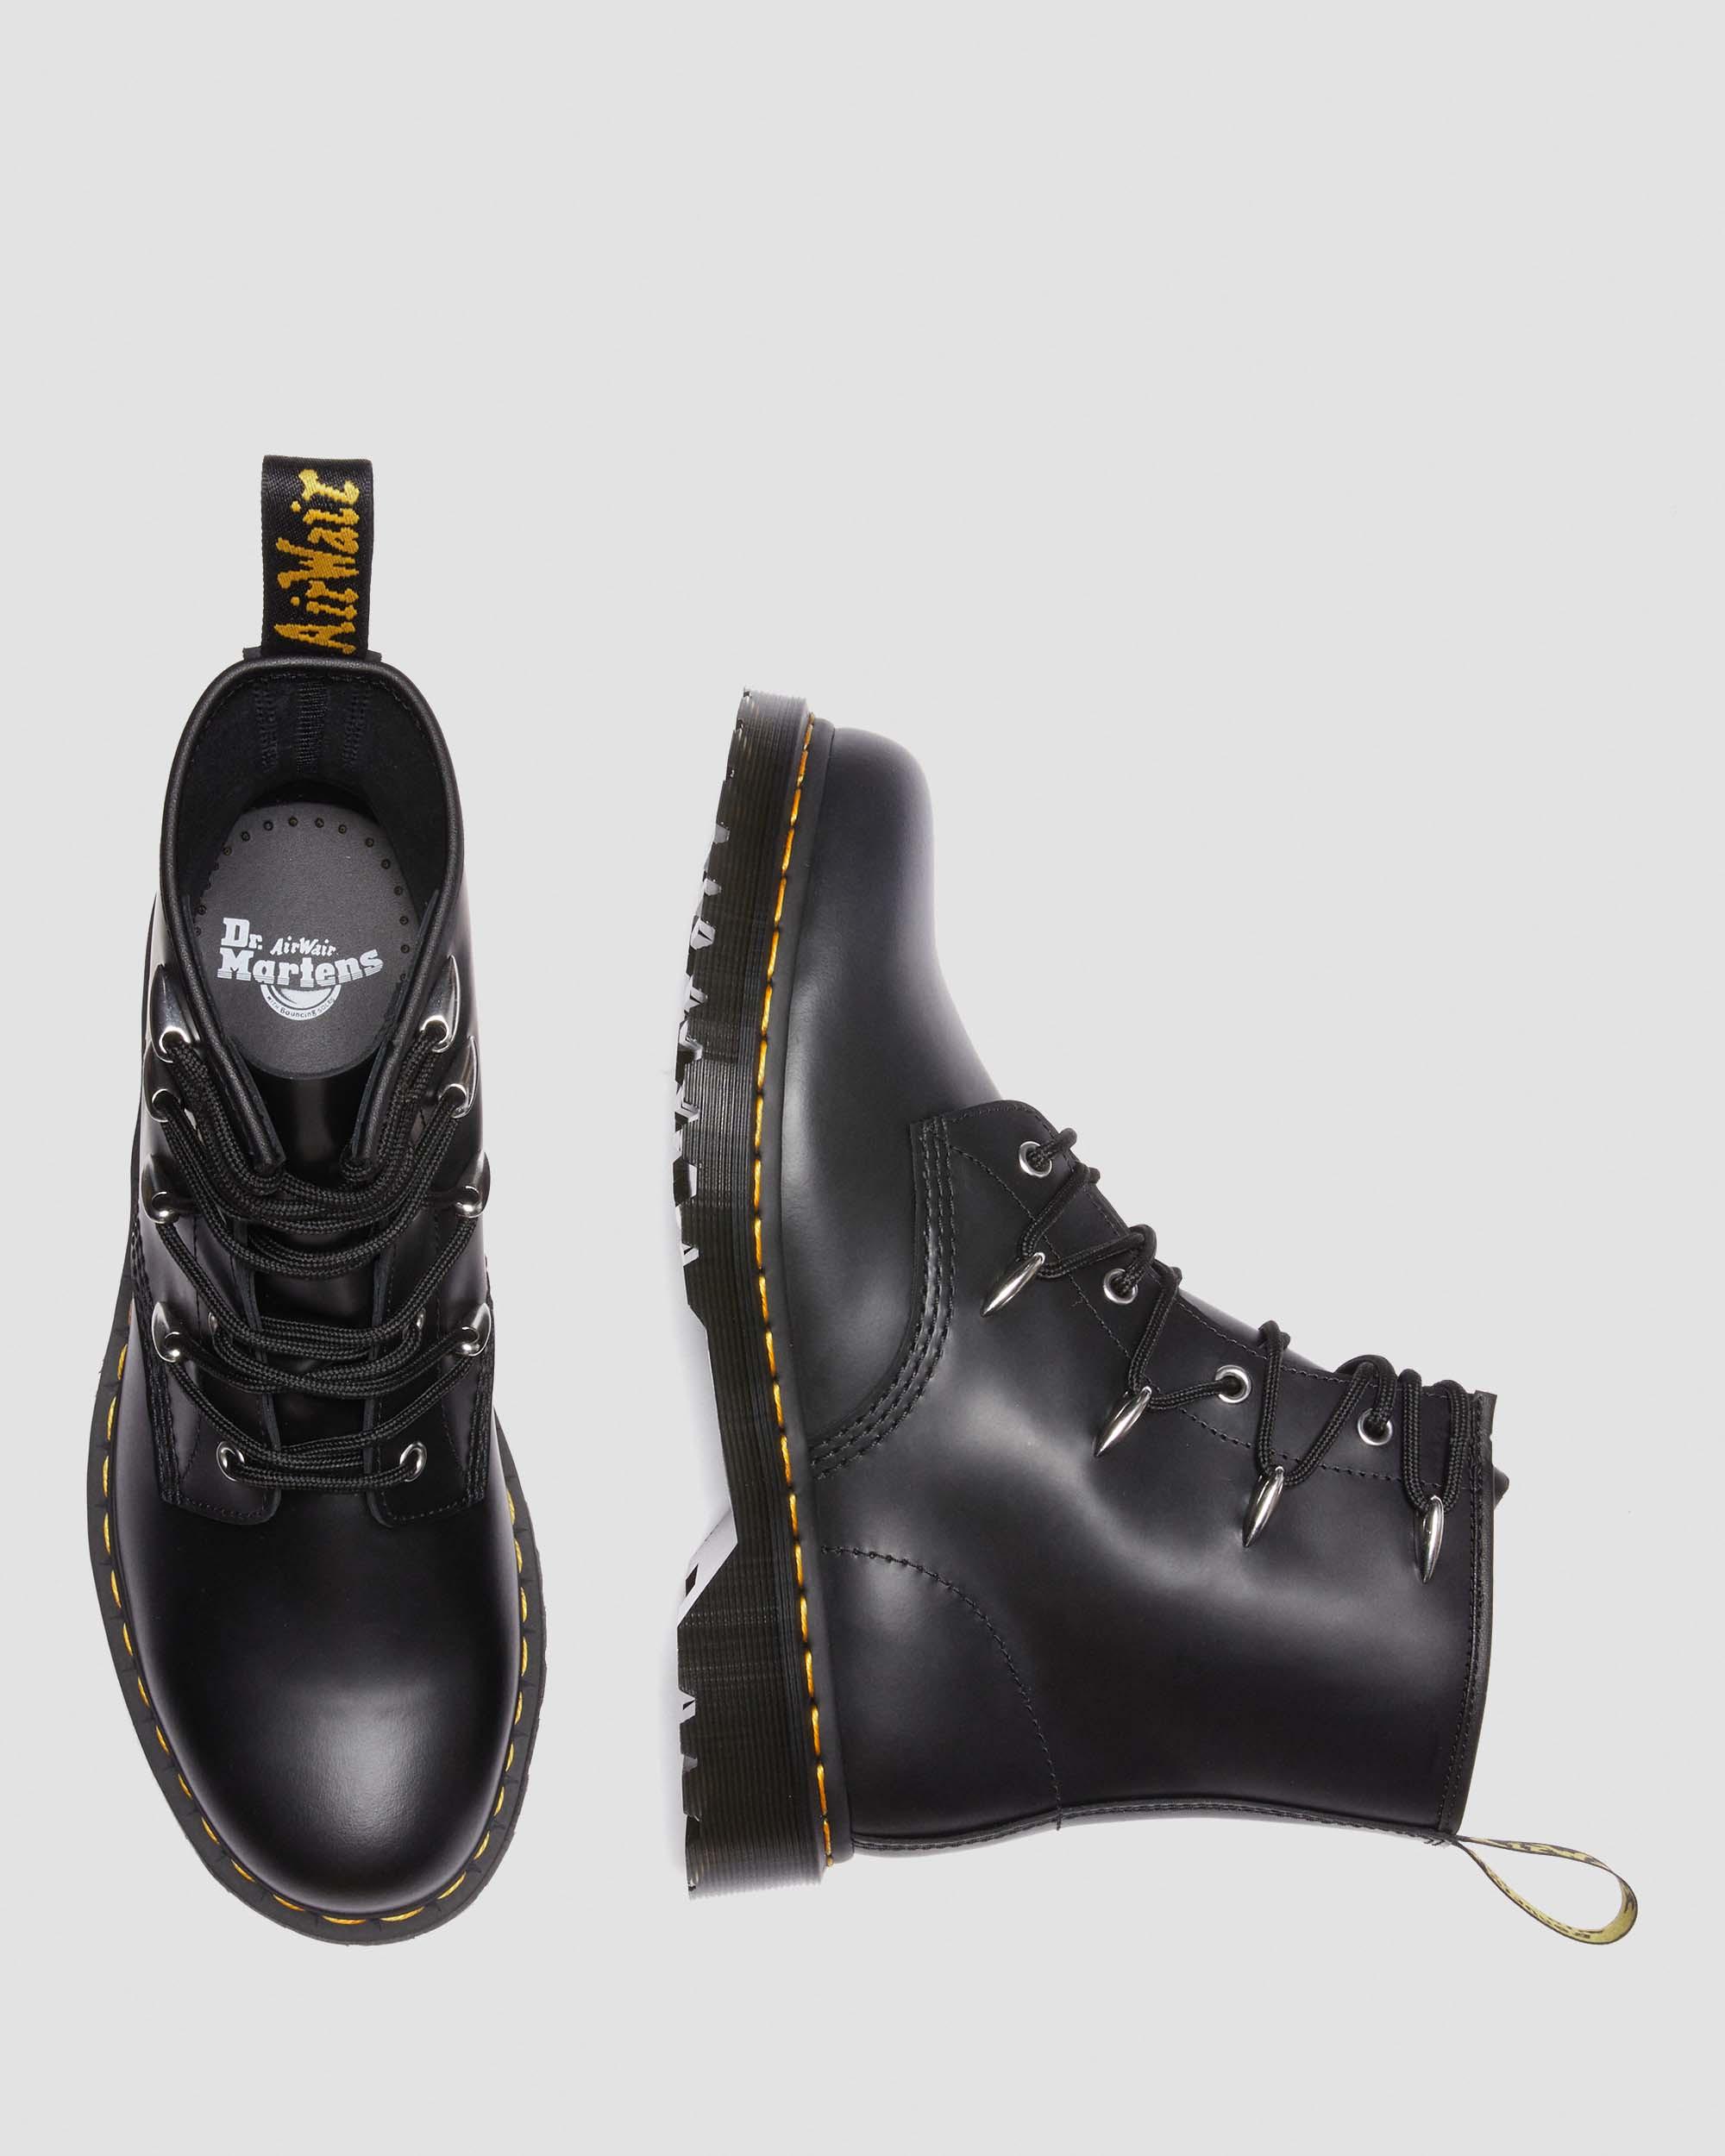 Dr. Martens, 1460 Alien Hardware Leather Lace Up Boots in Black, Size 12